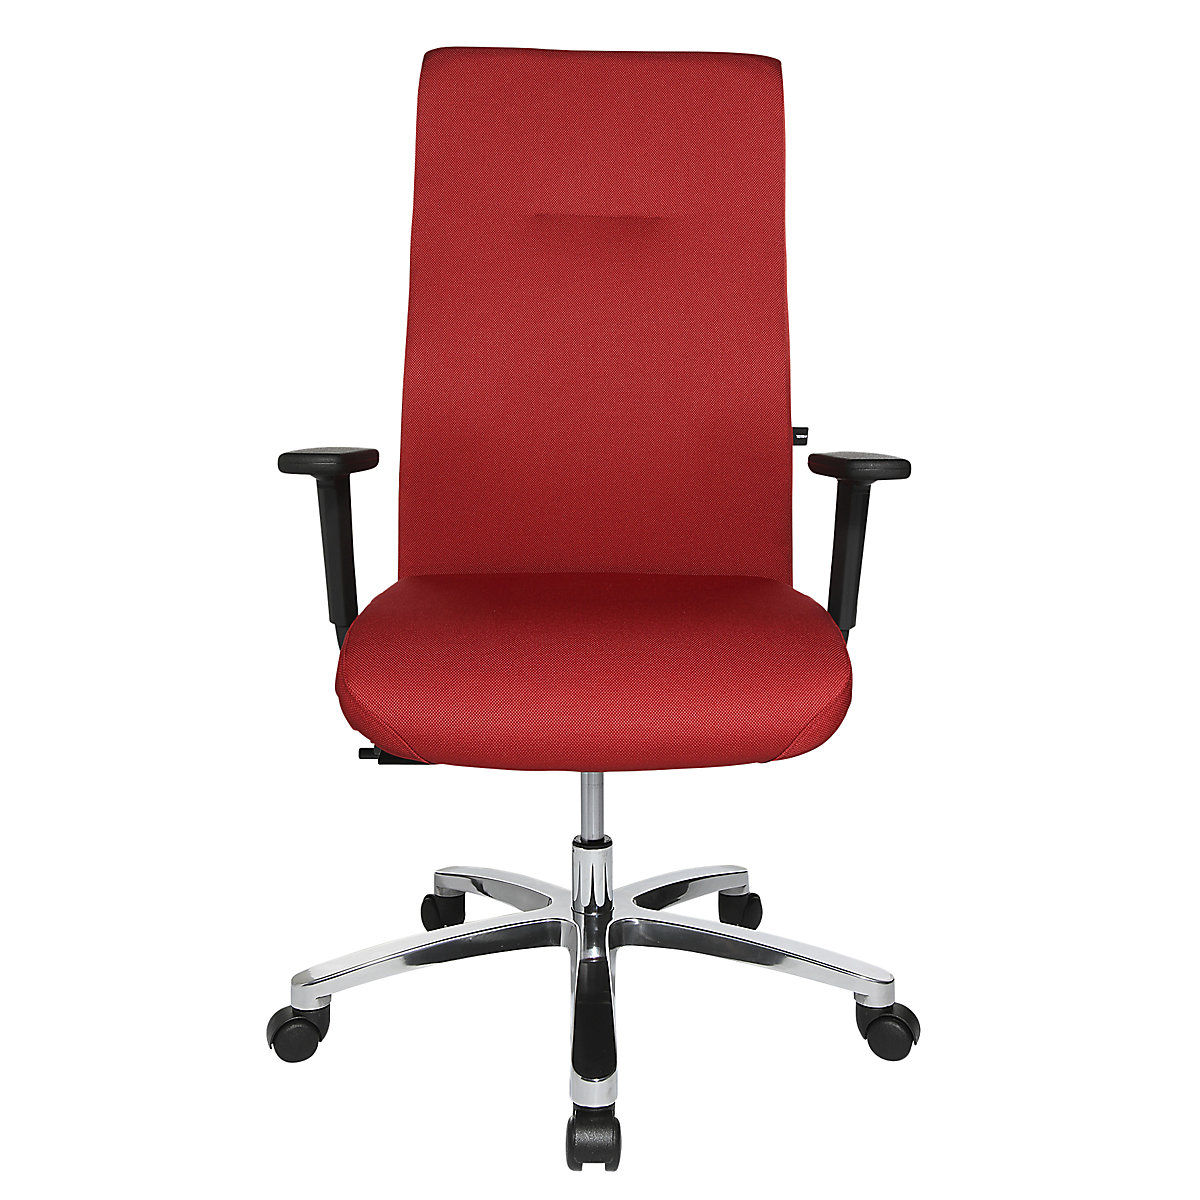 BIGSTAR20 operator swivel chair – Topstar, point synchronous mechanism, max. load 150 kg, red-2